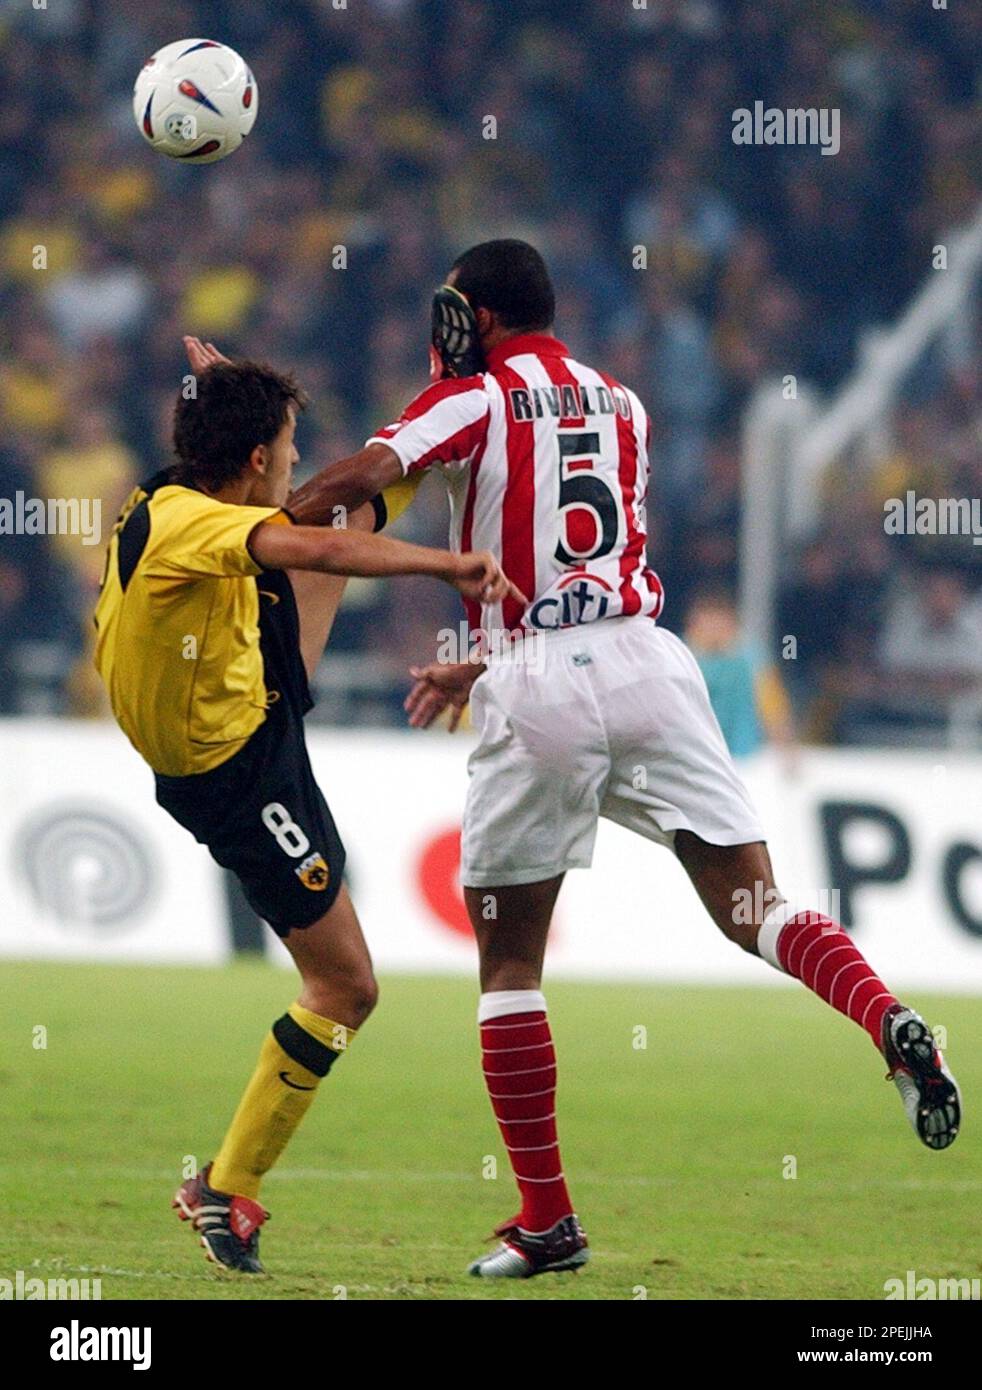 Bulgarian Ivan Rusev of AEK Athens, left, stops Brazilian Rivaldo of  Olympiakos during a Greek first division soccer league match at the Olympic  stadium of Athens on Sunday, Nov. 7, 2004. The